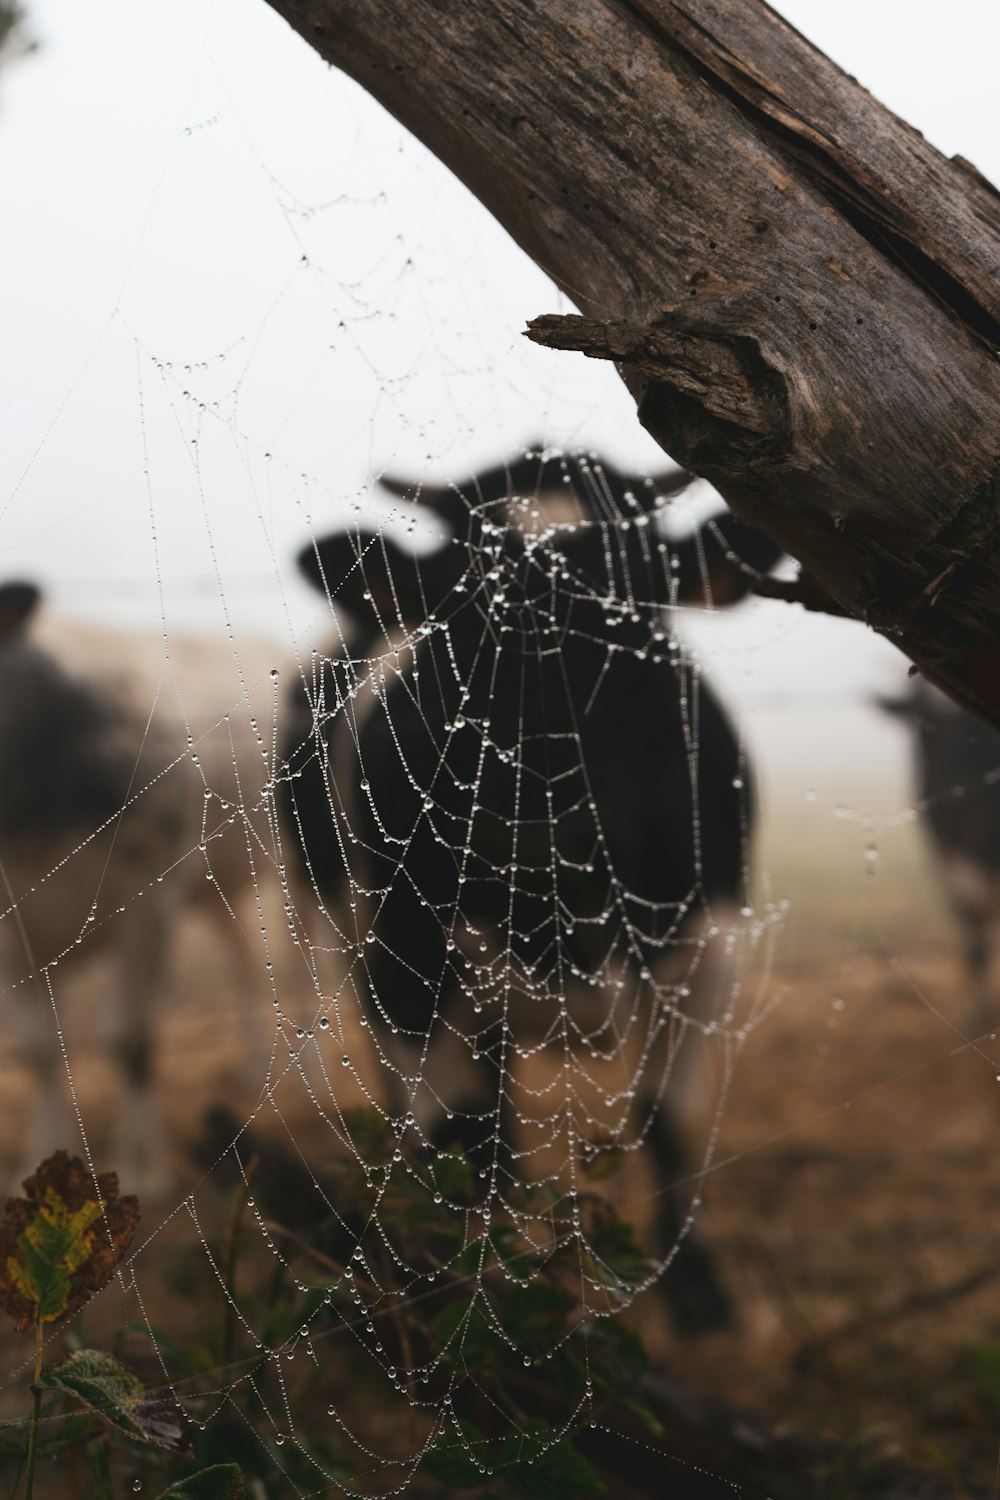 a close up of a spider web with a cow in the background